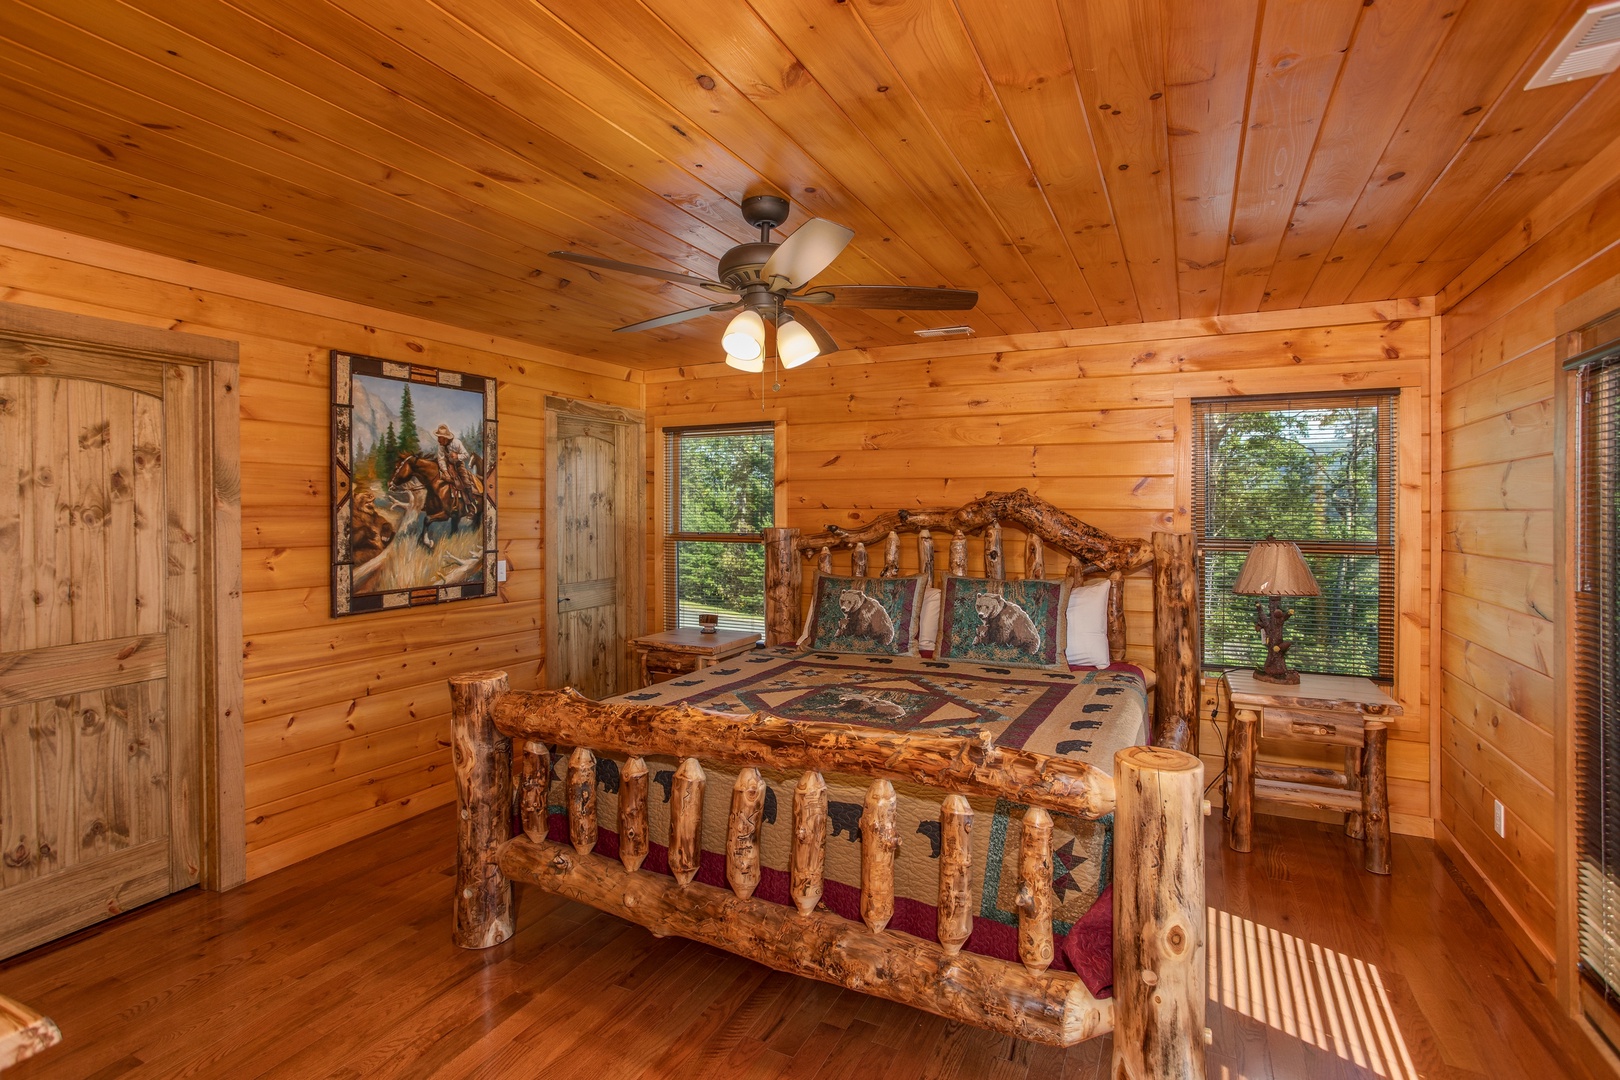 Bedroom with a king-sized log bed at Four Seasons Palace, a 5-bedroom cabin rental located in Pigeon Forge